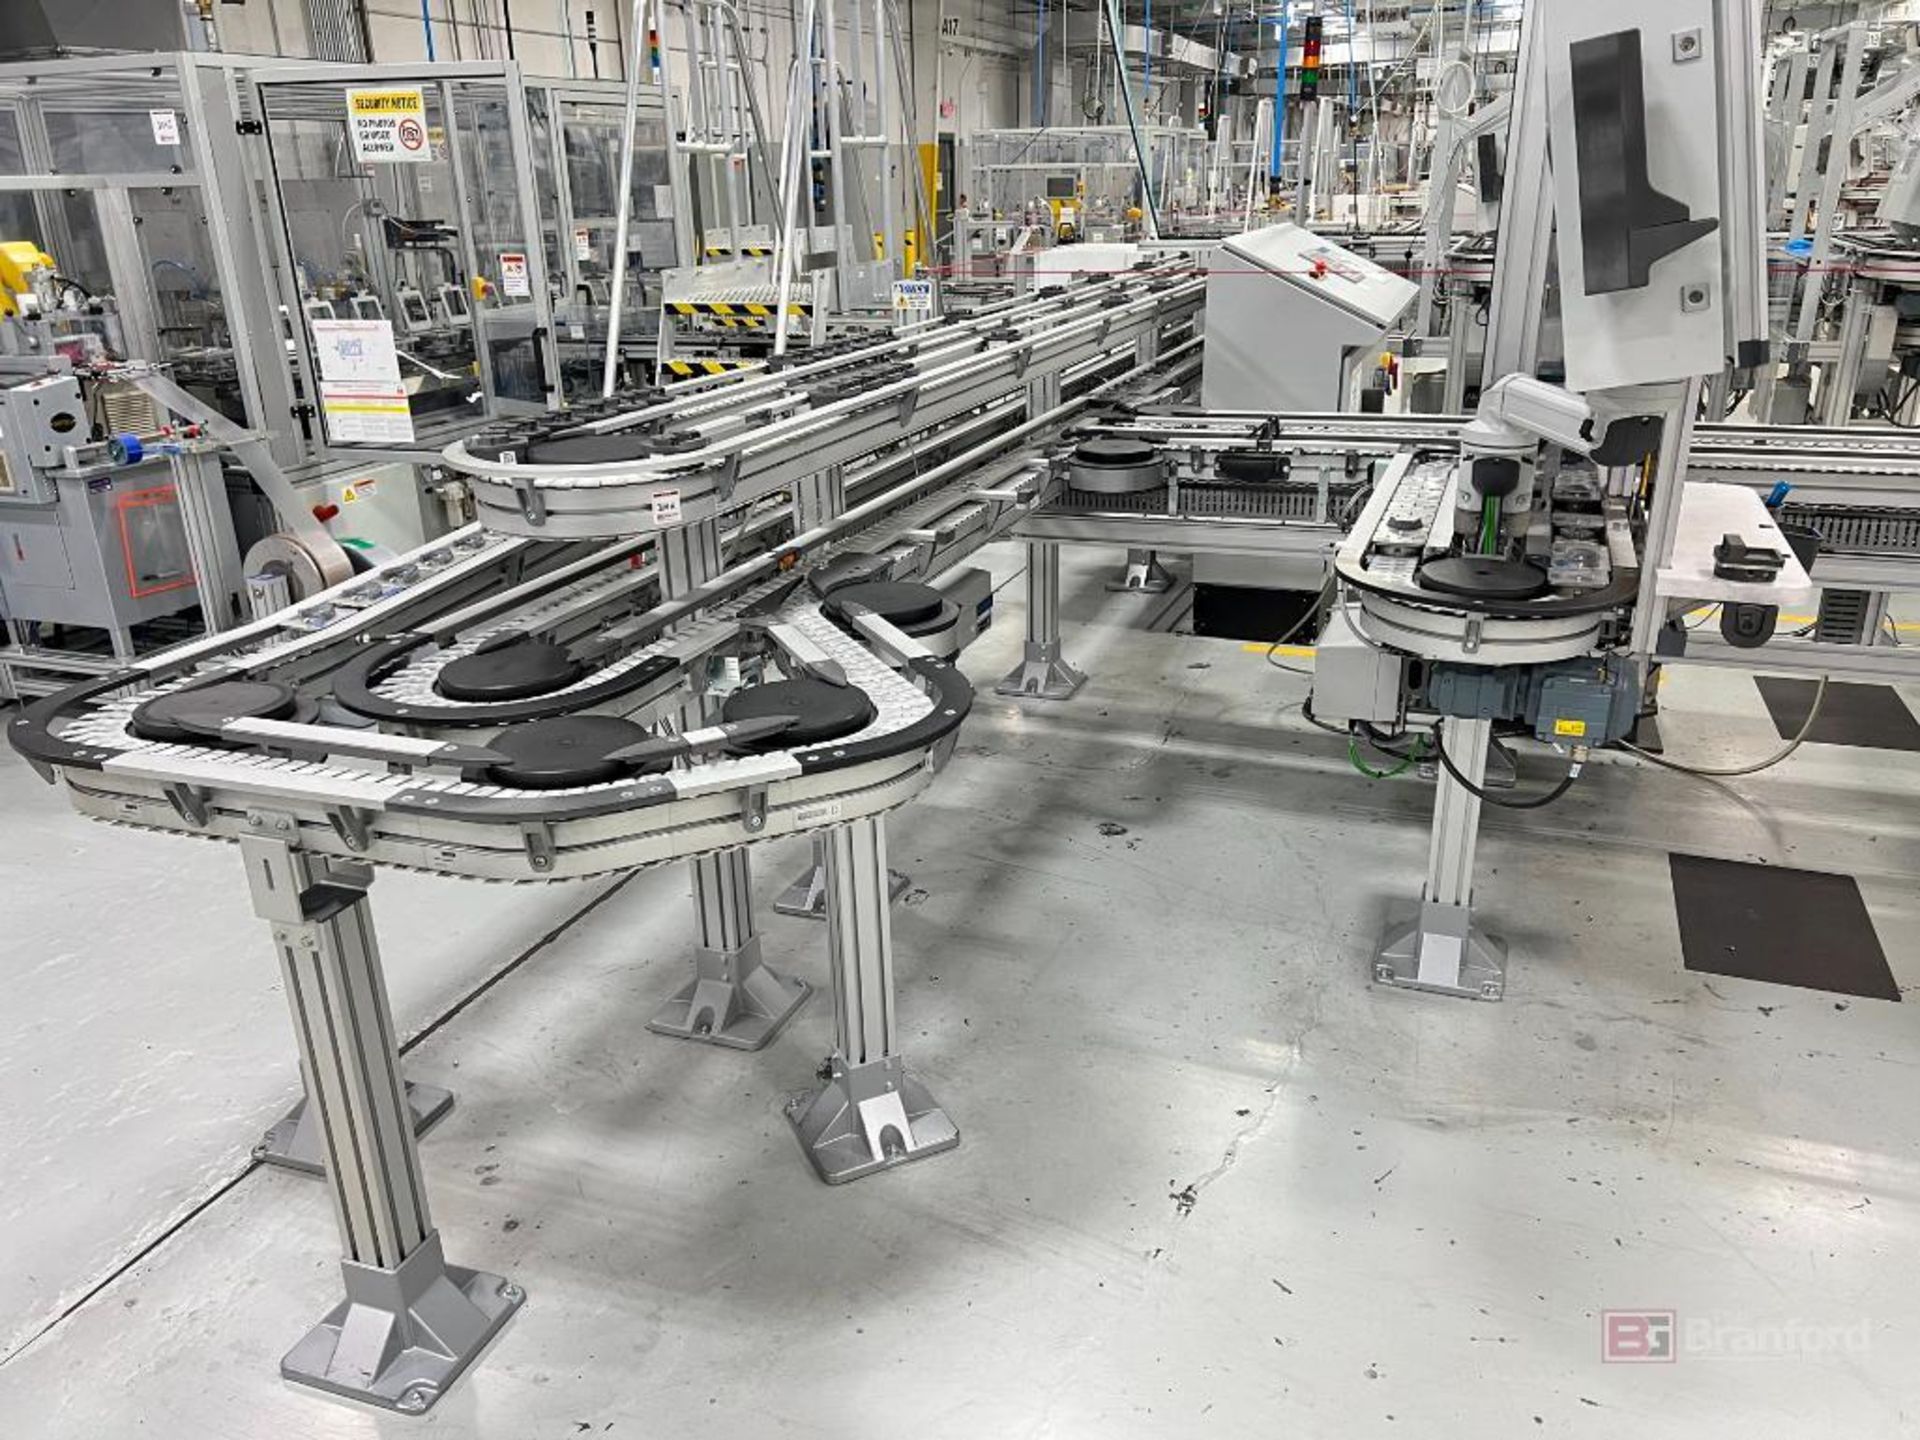 Flexlink Gen2 Multi-Layer Belt Conveyor System with DRO main control - Image 8 of 16